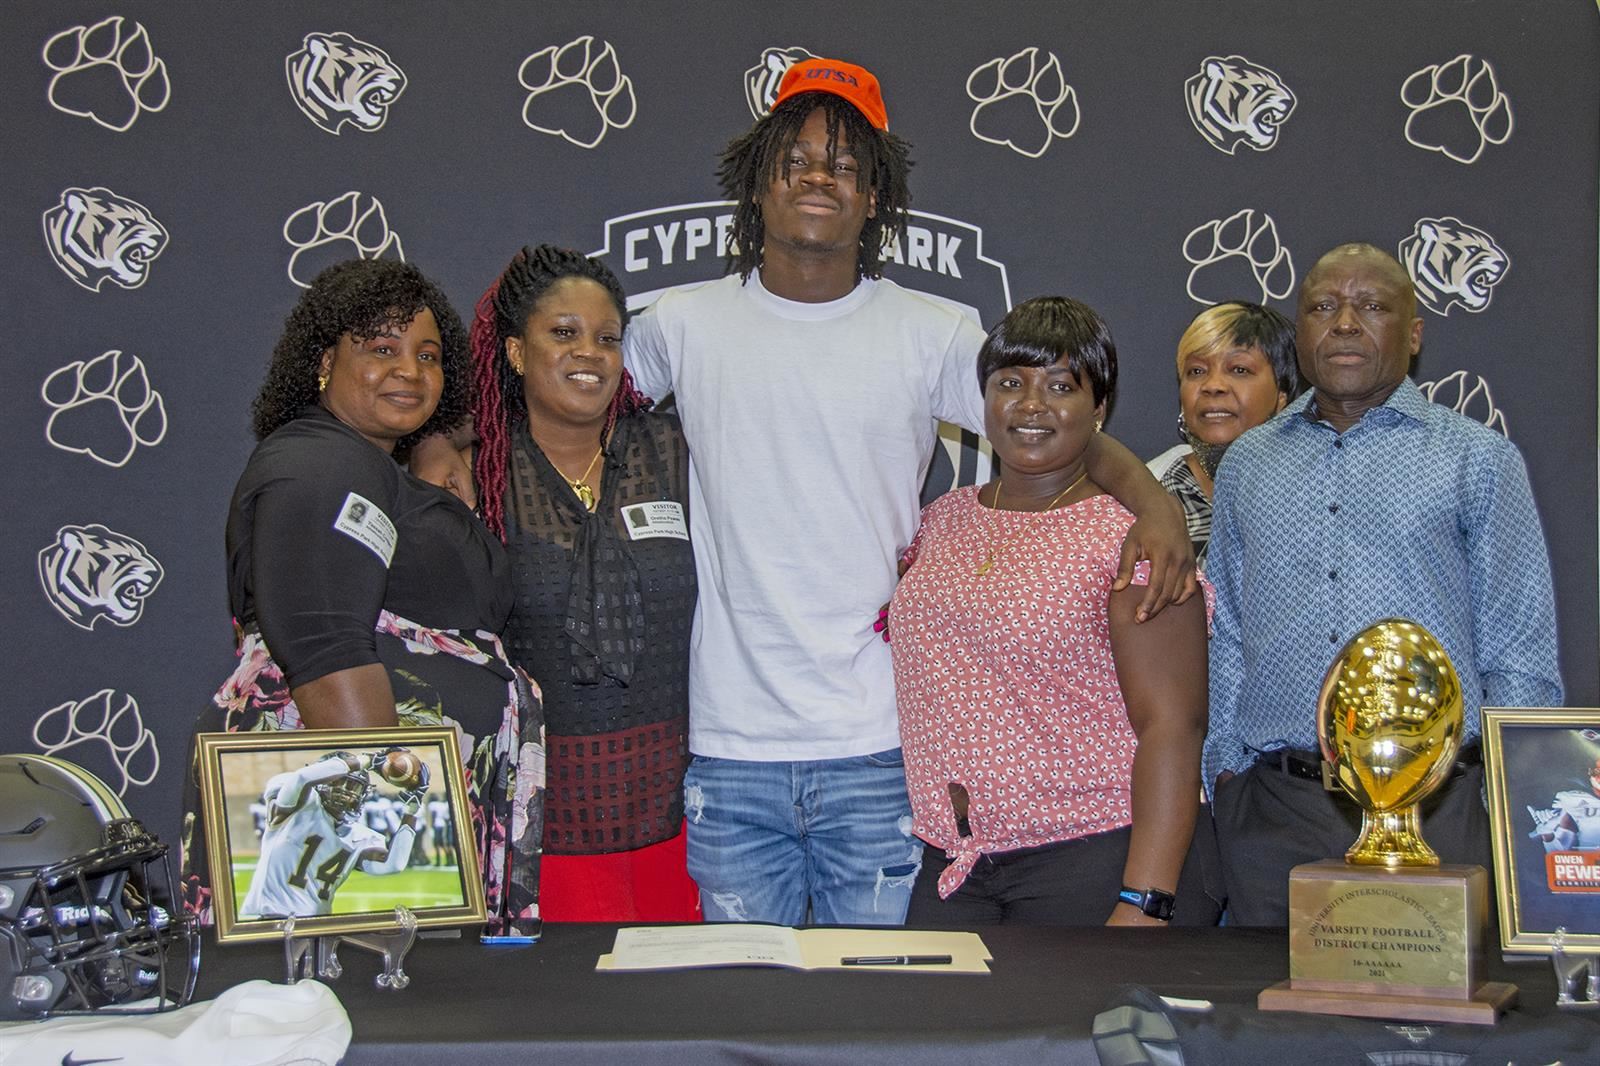 Cypress Park High School senior Owen Pewee, center, poses with his family after signing his letter of intent.